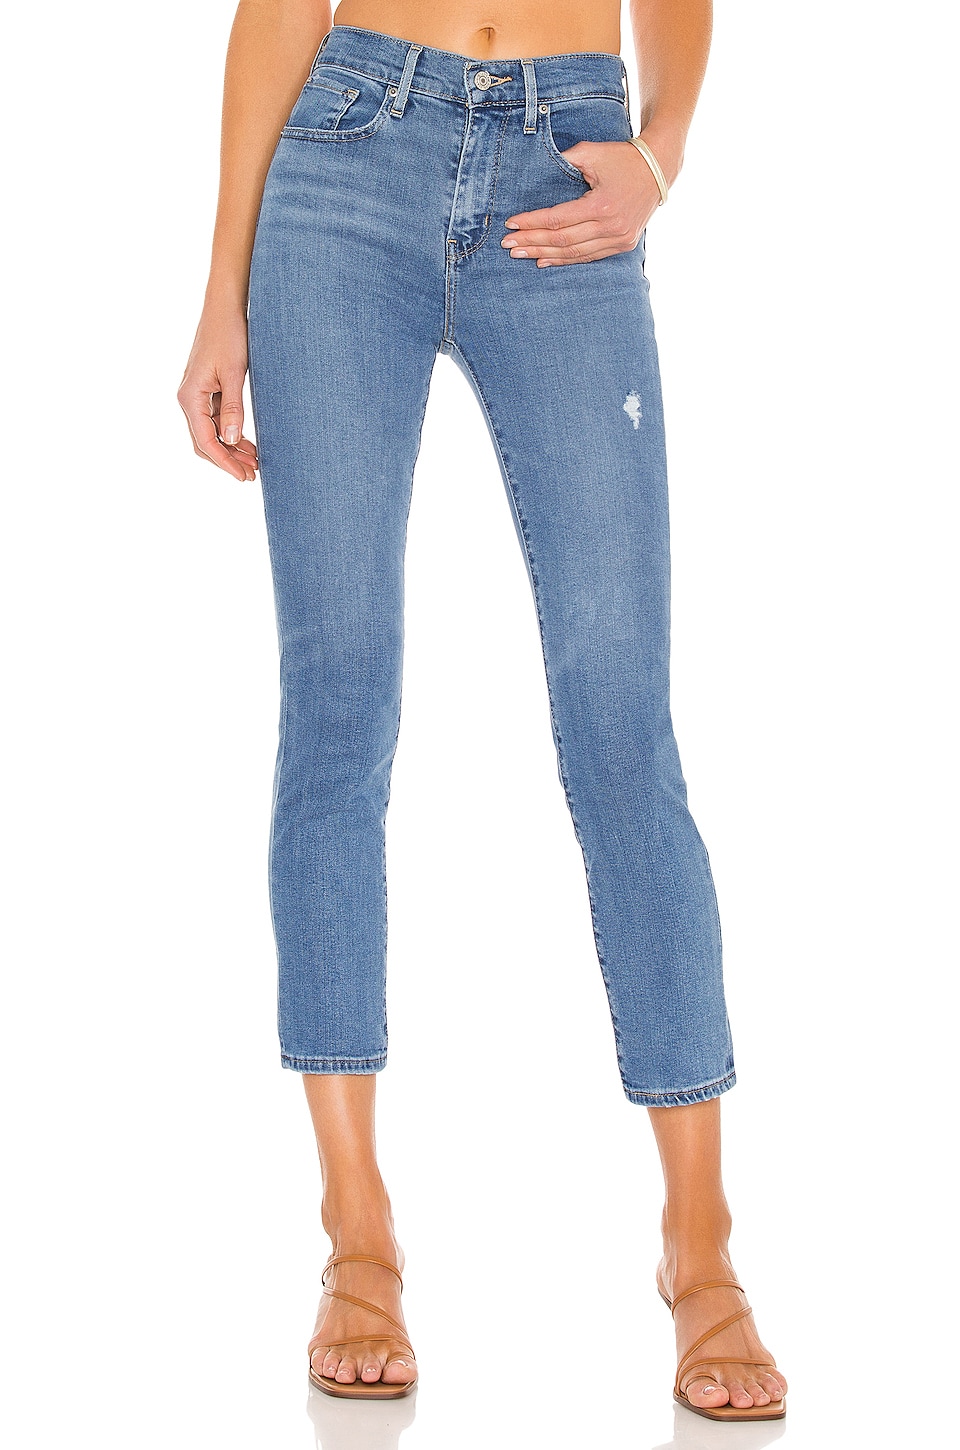 LEVI'S 724 High Rise Straight Crop in Rio Top Line | REVOLVE